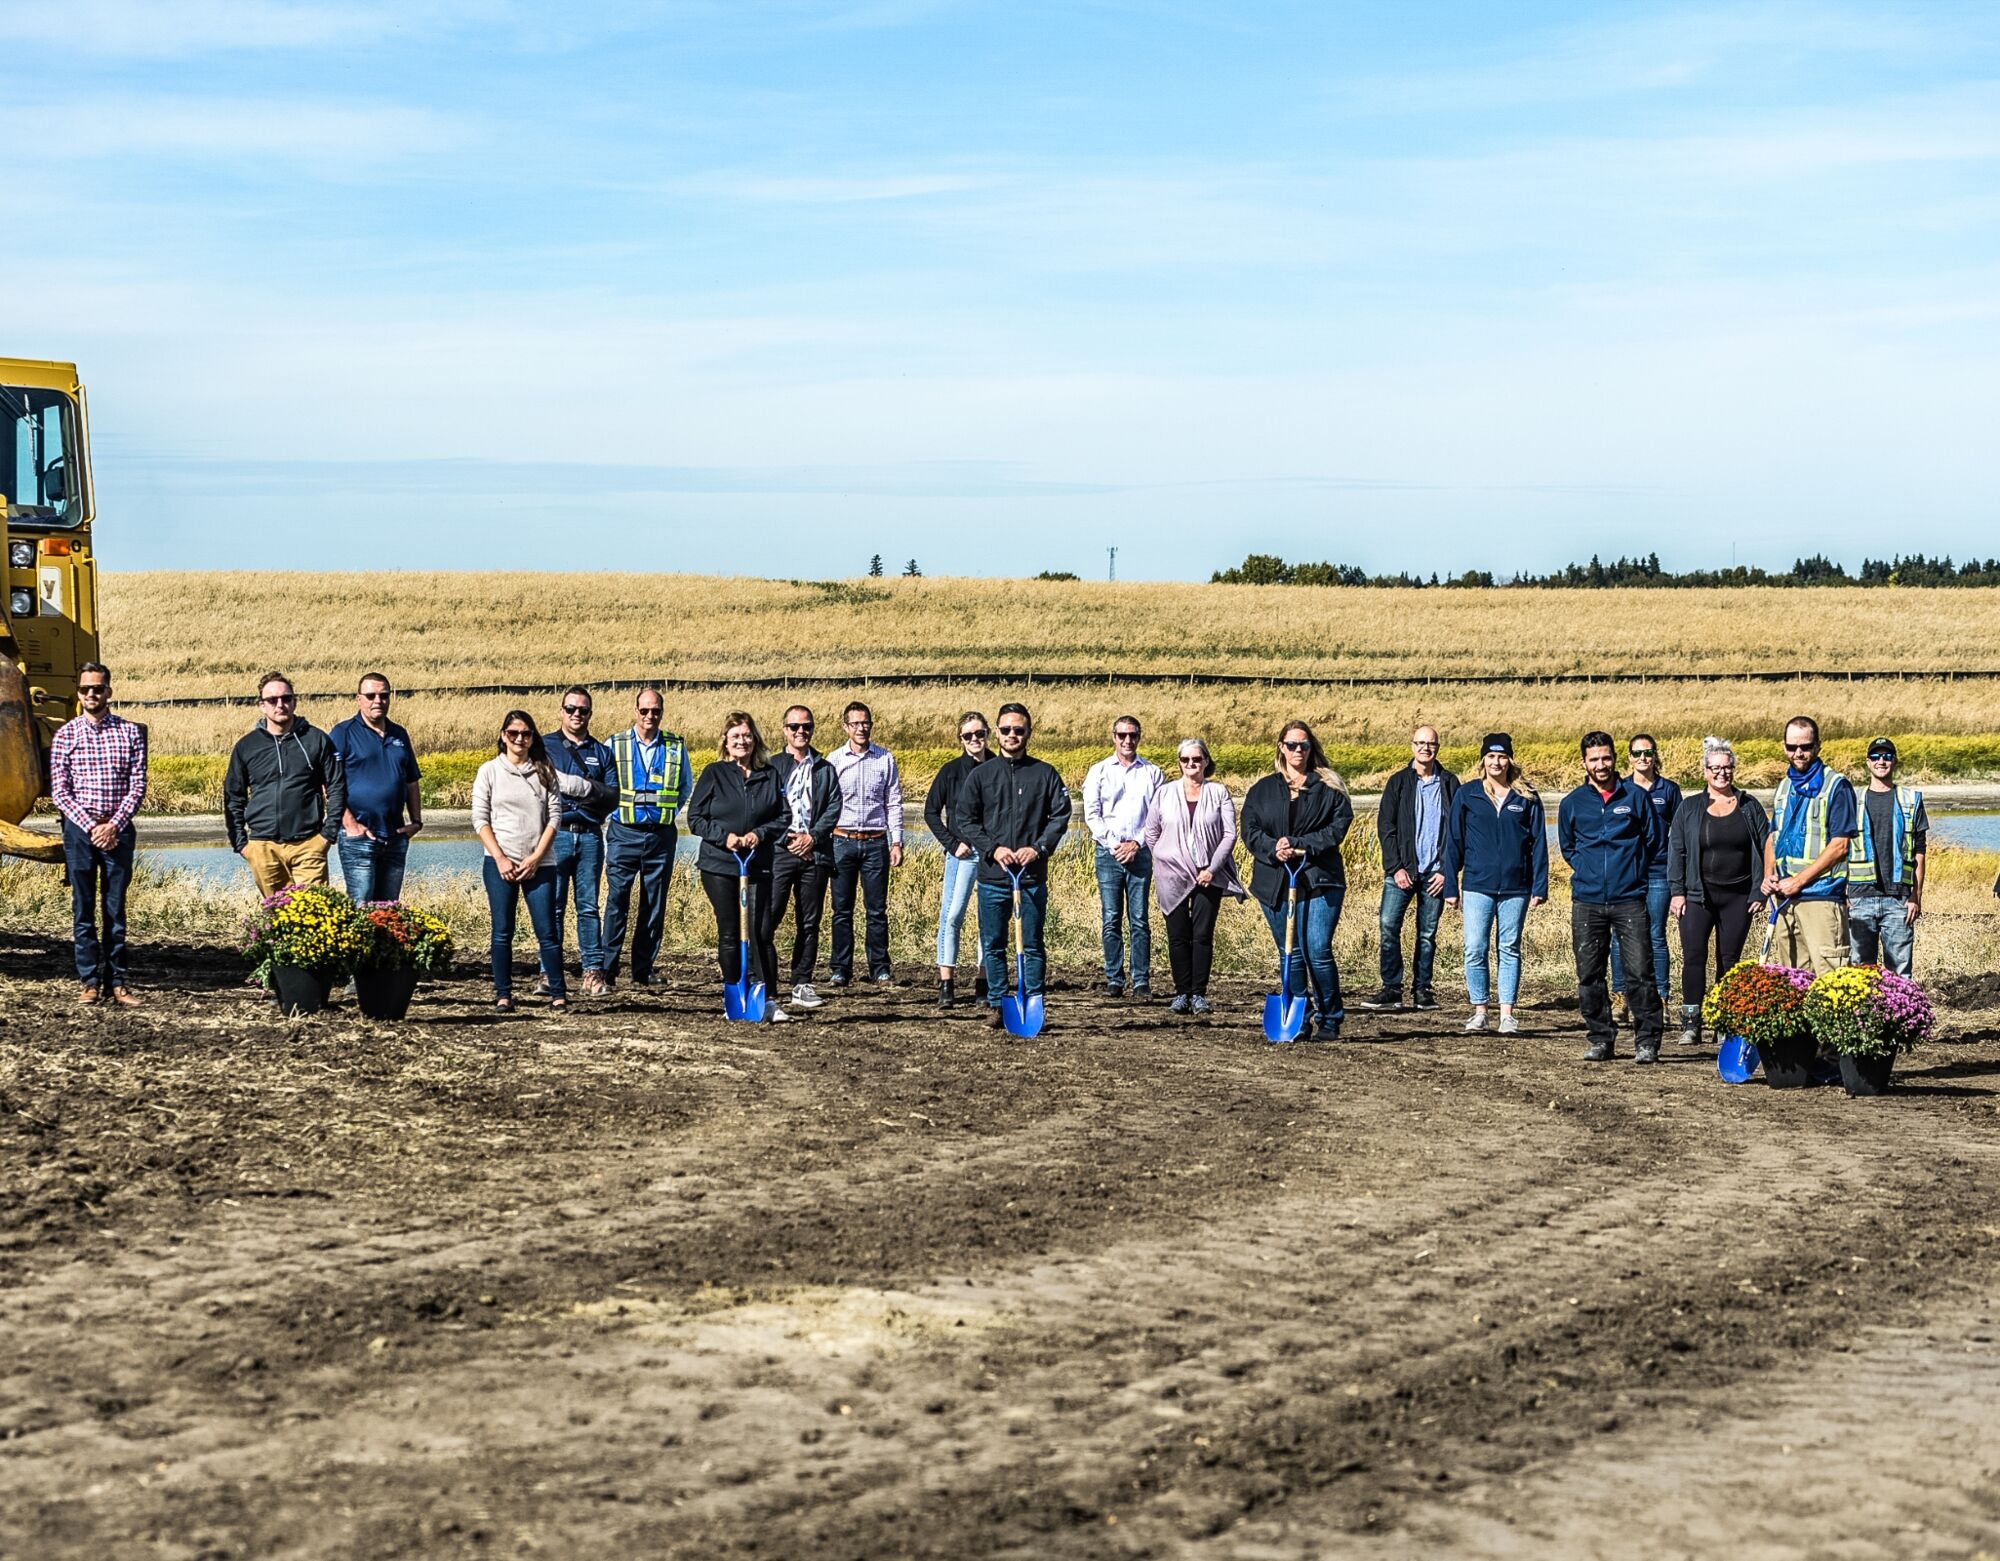 A large group of people stand in an empty field, some of which hold blue shovels.